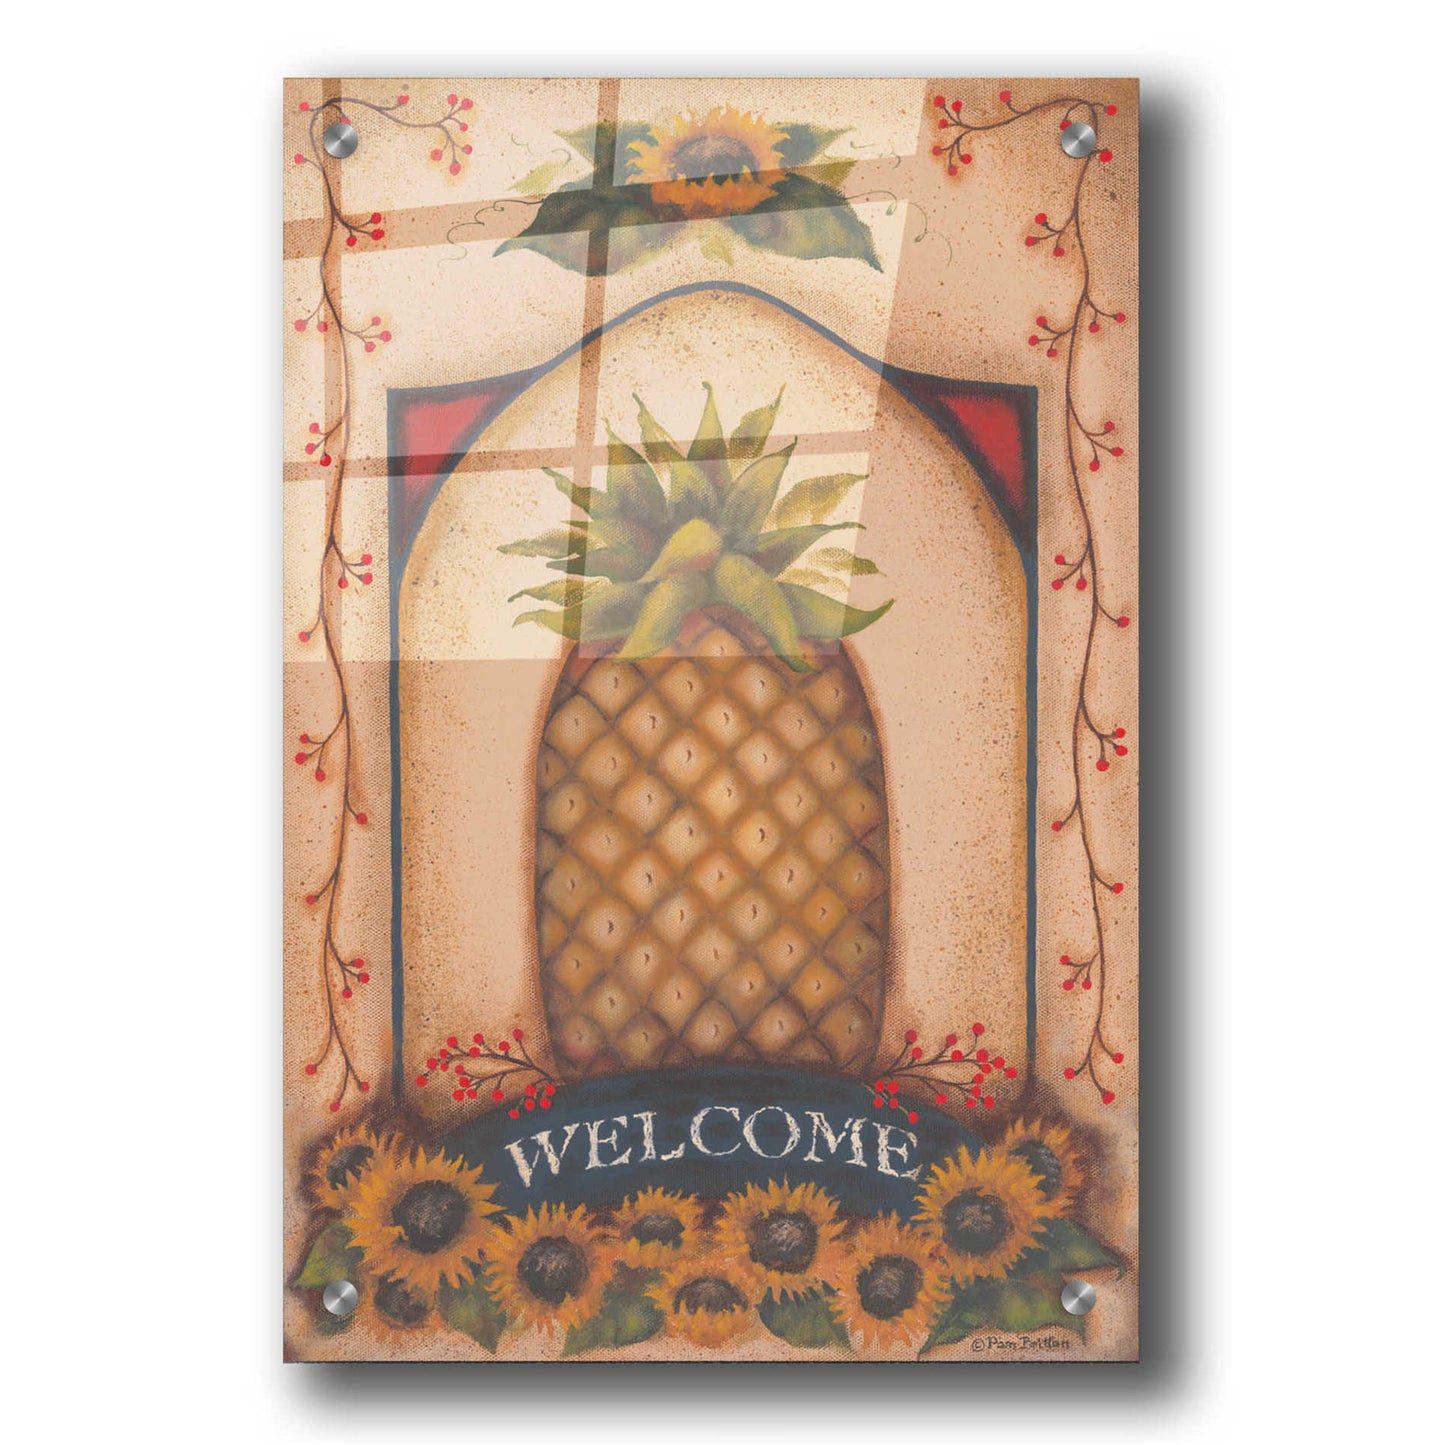 Epic Art 'Welcome Pineapple & Sunflowers' by Pam Britton, Acrylic Glass Wall Art,24x36